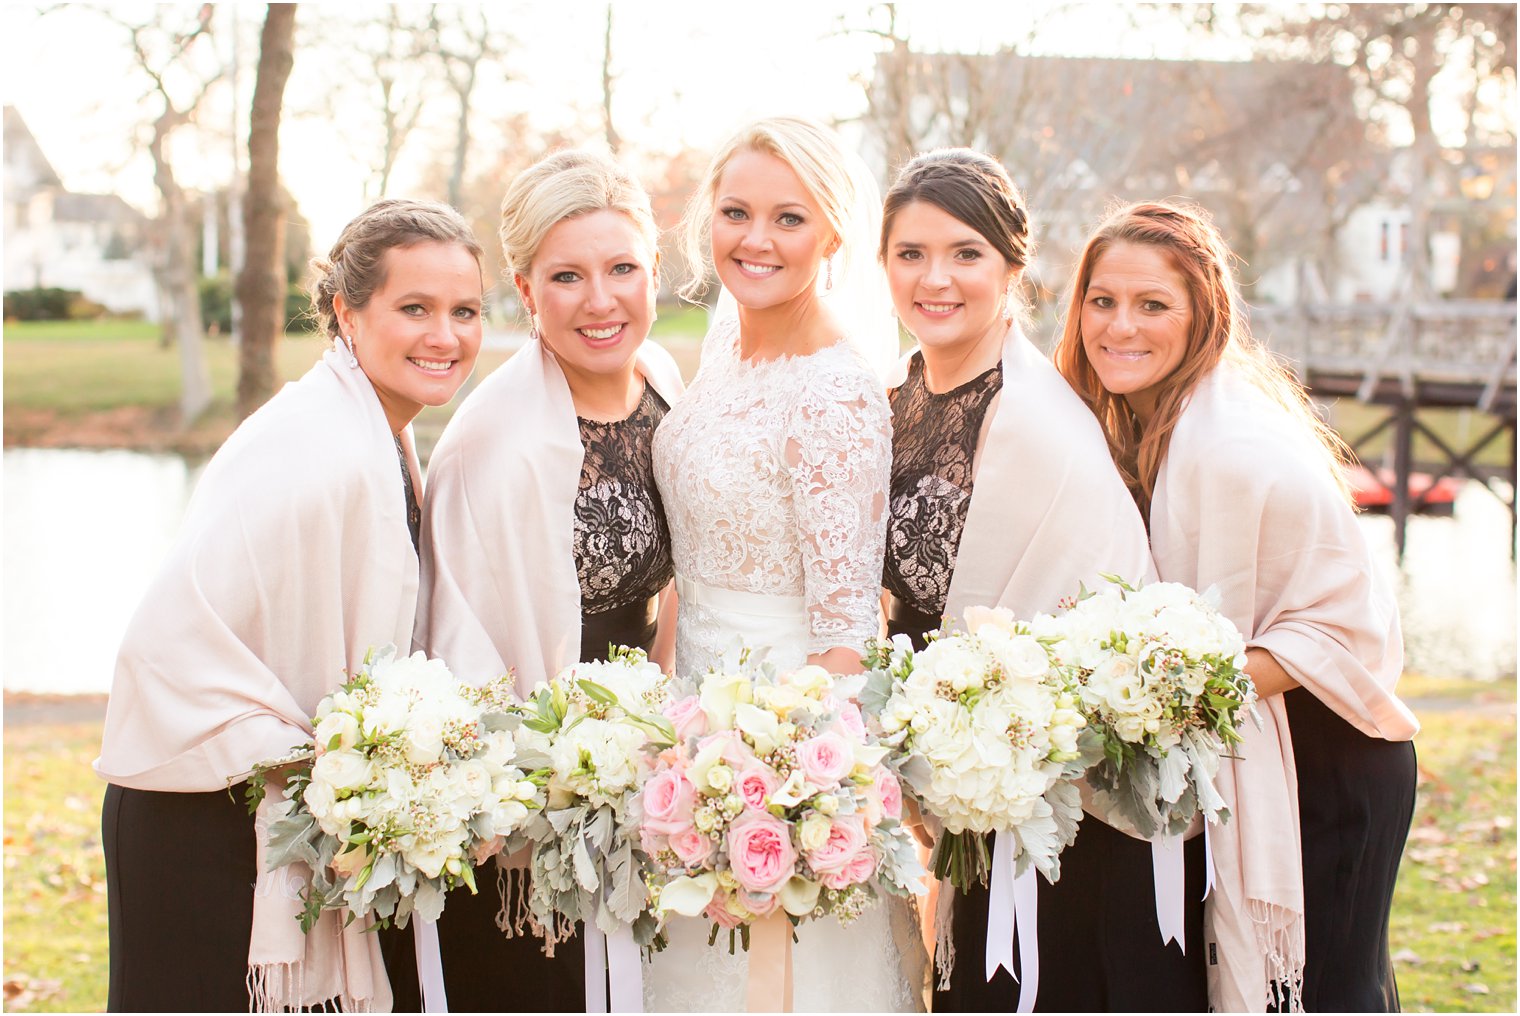 Tips for Planning a Winter Wedding | Gift your ladies something warm to wear.